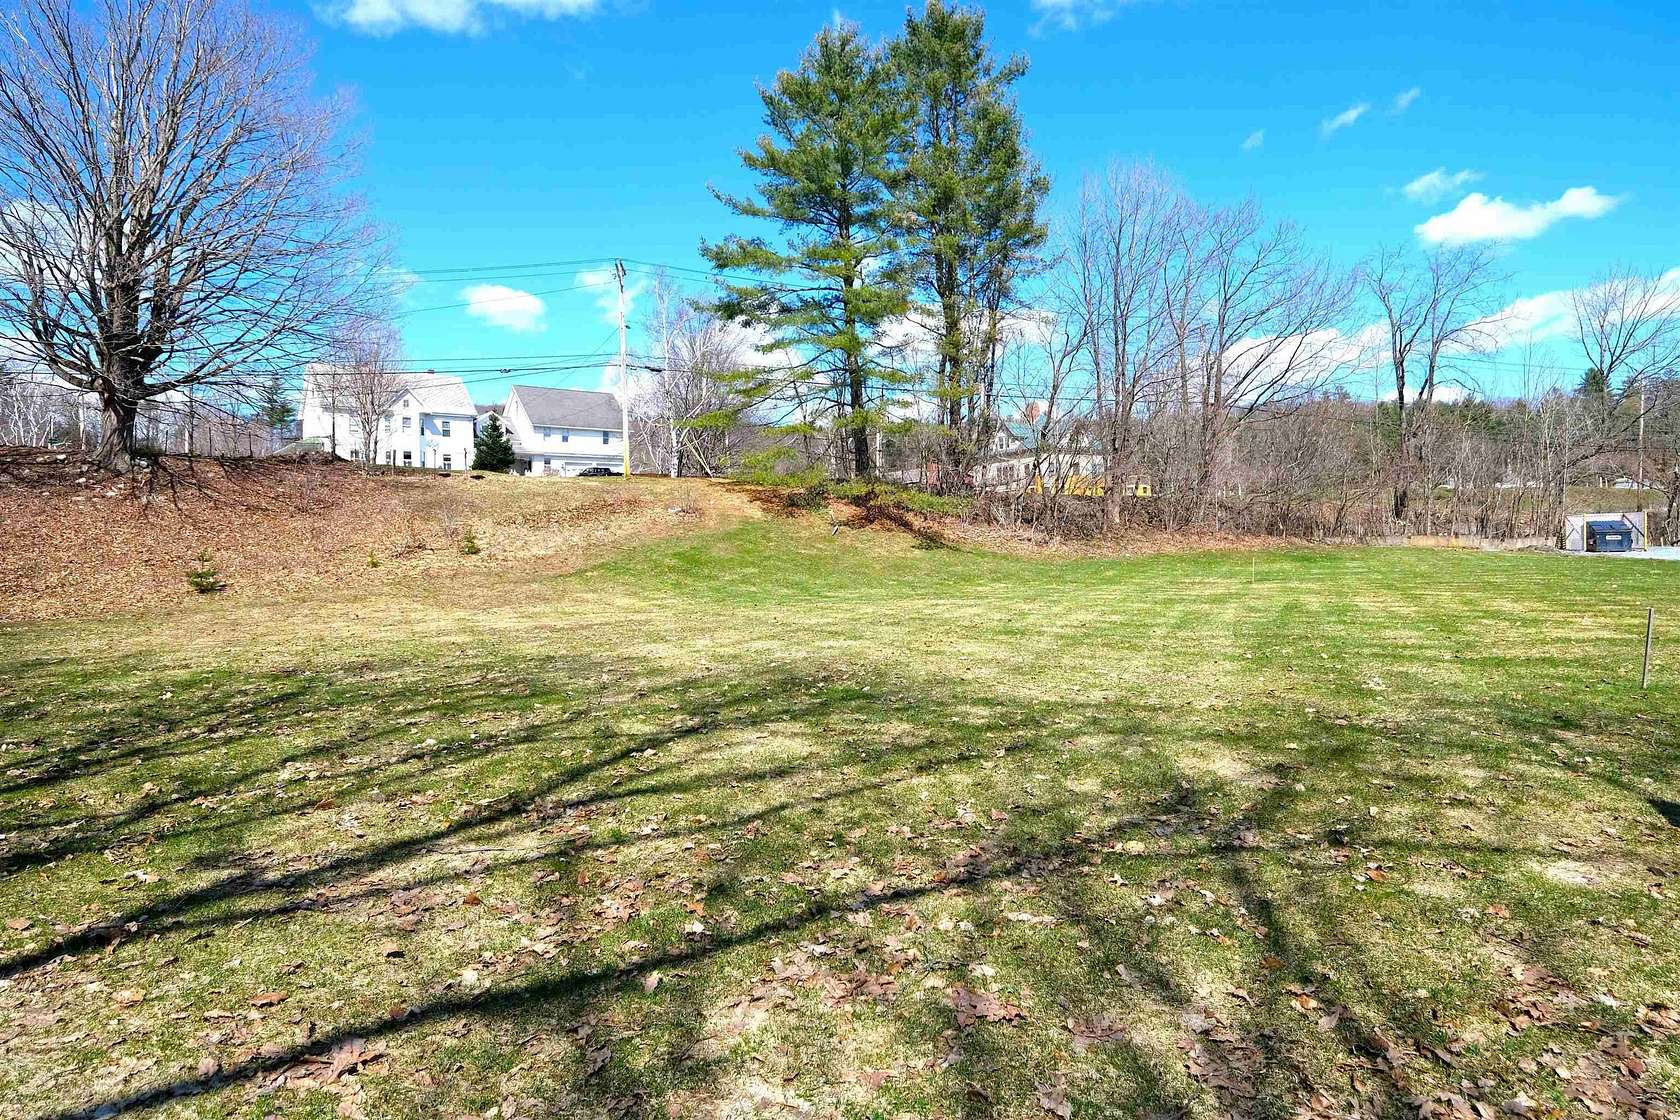 0.34 Acres of Land for Sale in Ludlow, Vermont